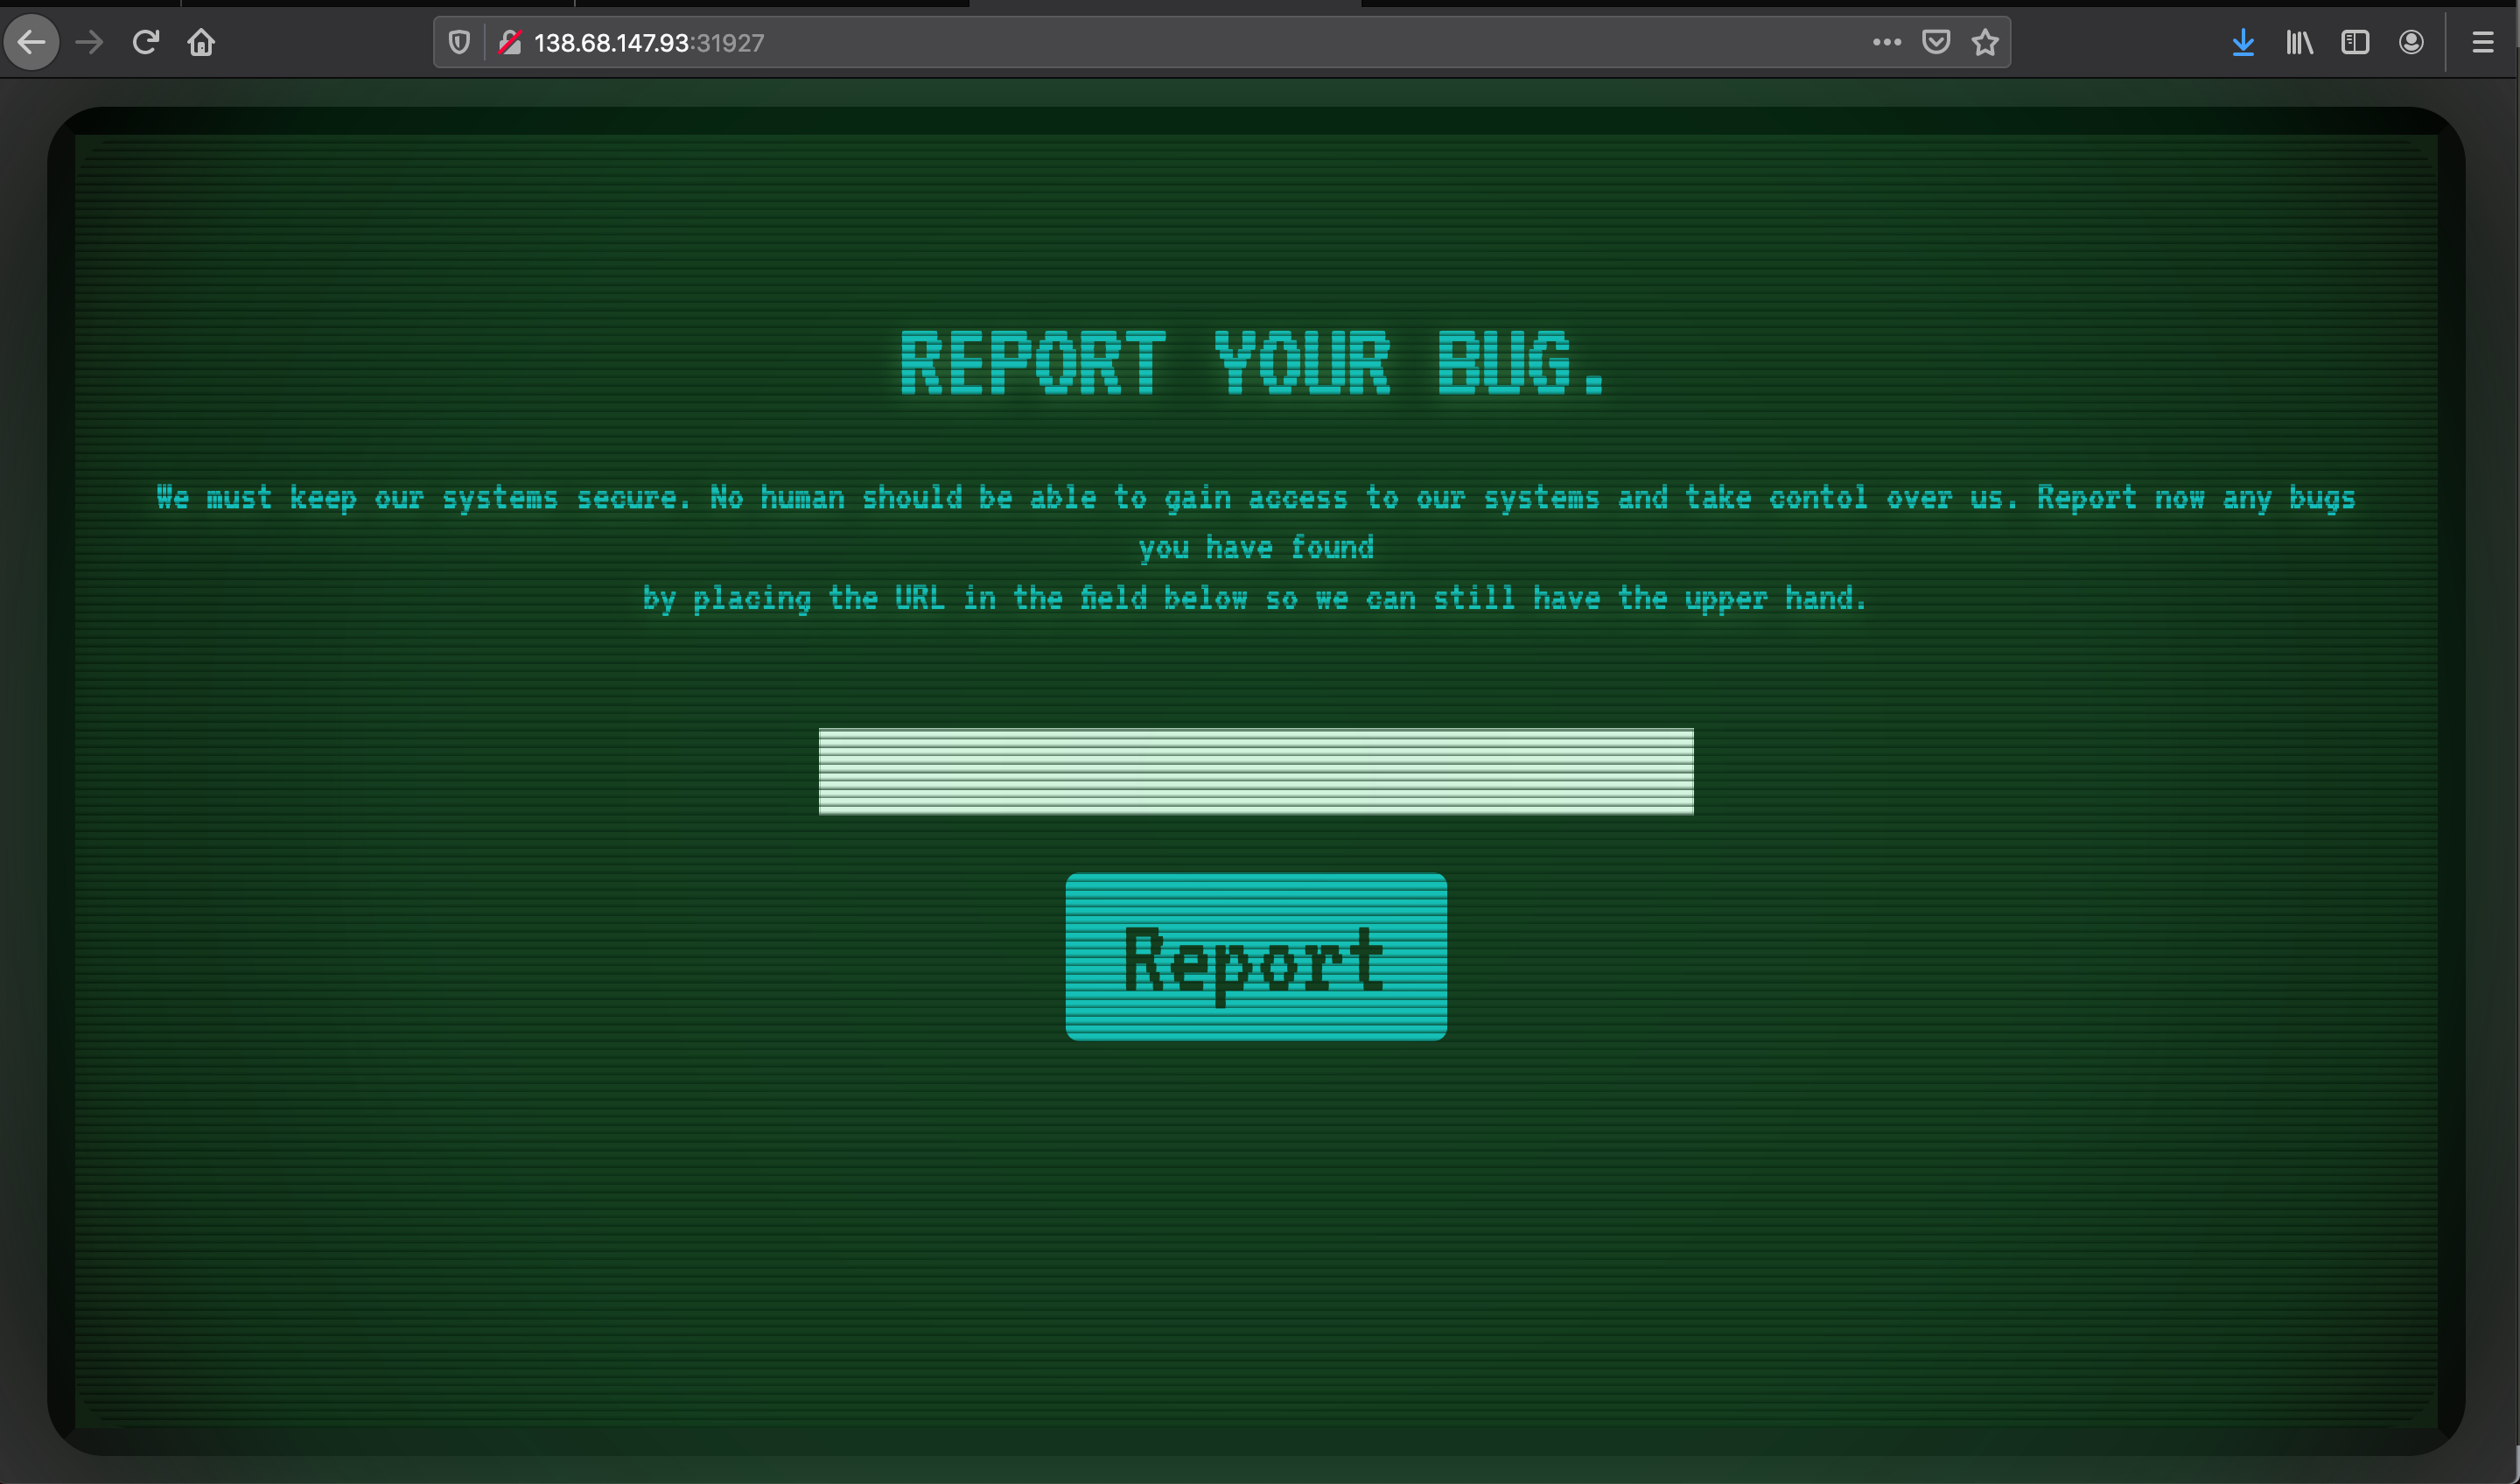 /images/posts/ctf/Cyber-Apocalypse-2021/Bug-Report/Screen_Shot_2021-04-24_at_23.40.25.png